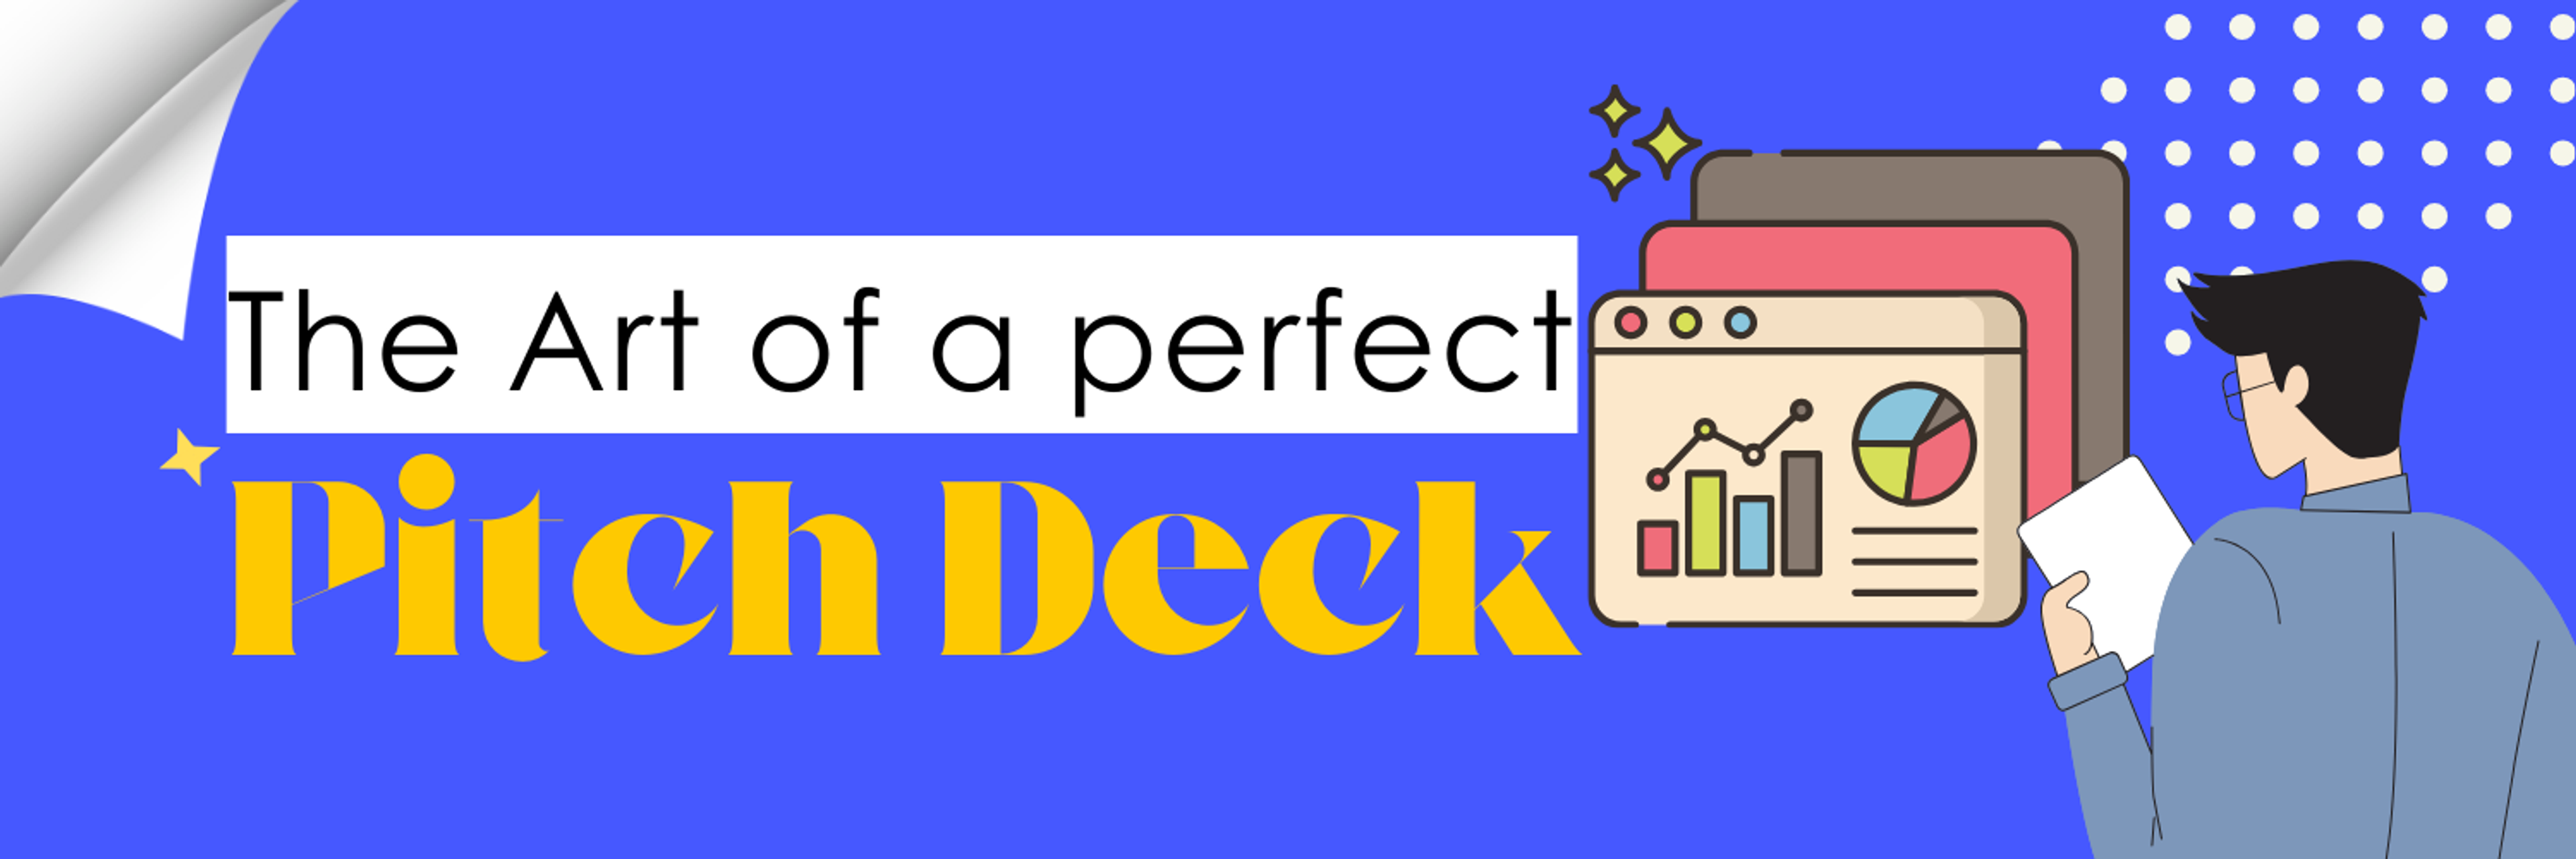 The image shows a digital banner titled "The Art of a perfect Pitch Deck." It features a bright blue background with white polka dots on the right side. On the left, the text is in bold yellow, and there is a graphic of a man looking at a large tablet or display screen, which illustrates various charts and data, indicating elements of a pitch deck. The overall design is sleek and modern, aimed at capturing attention for the subject of creating effective business presentations.